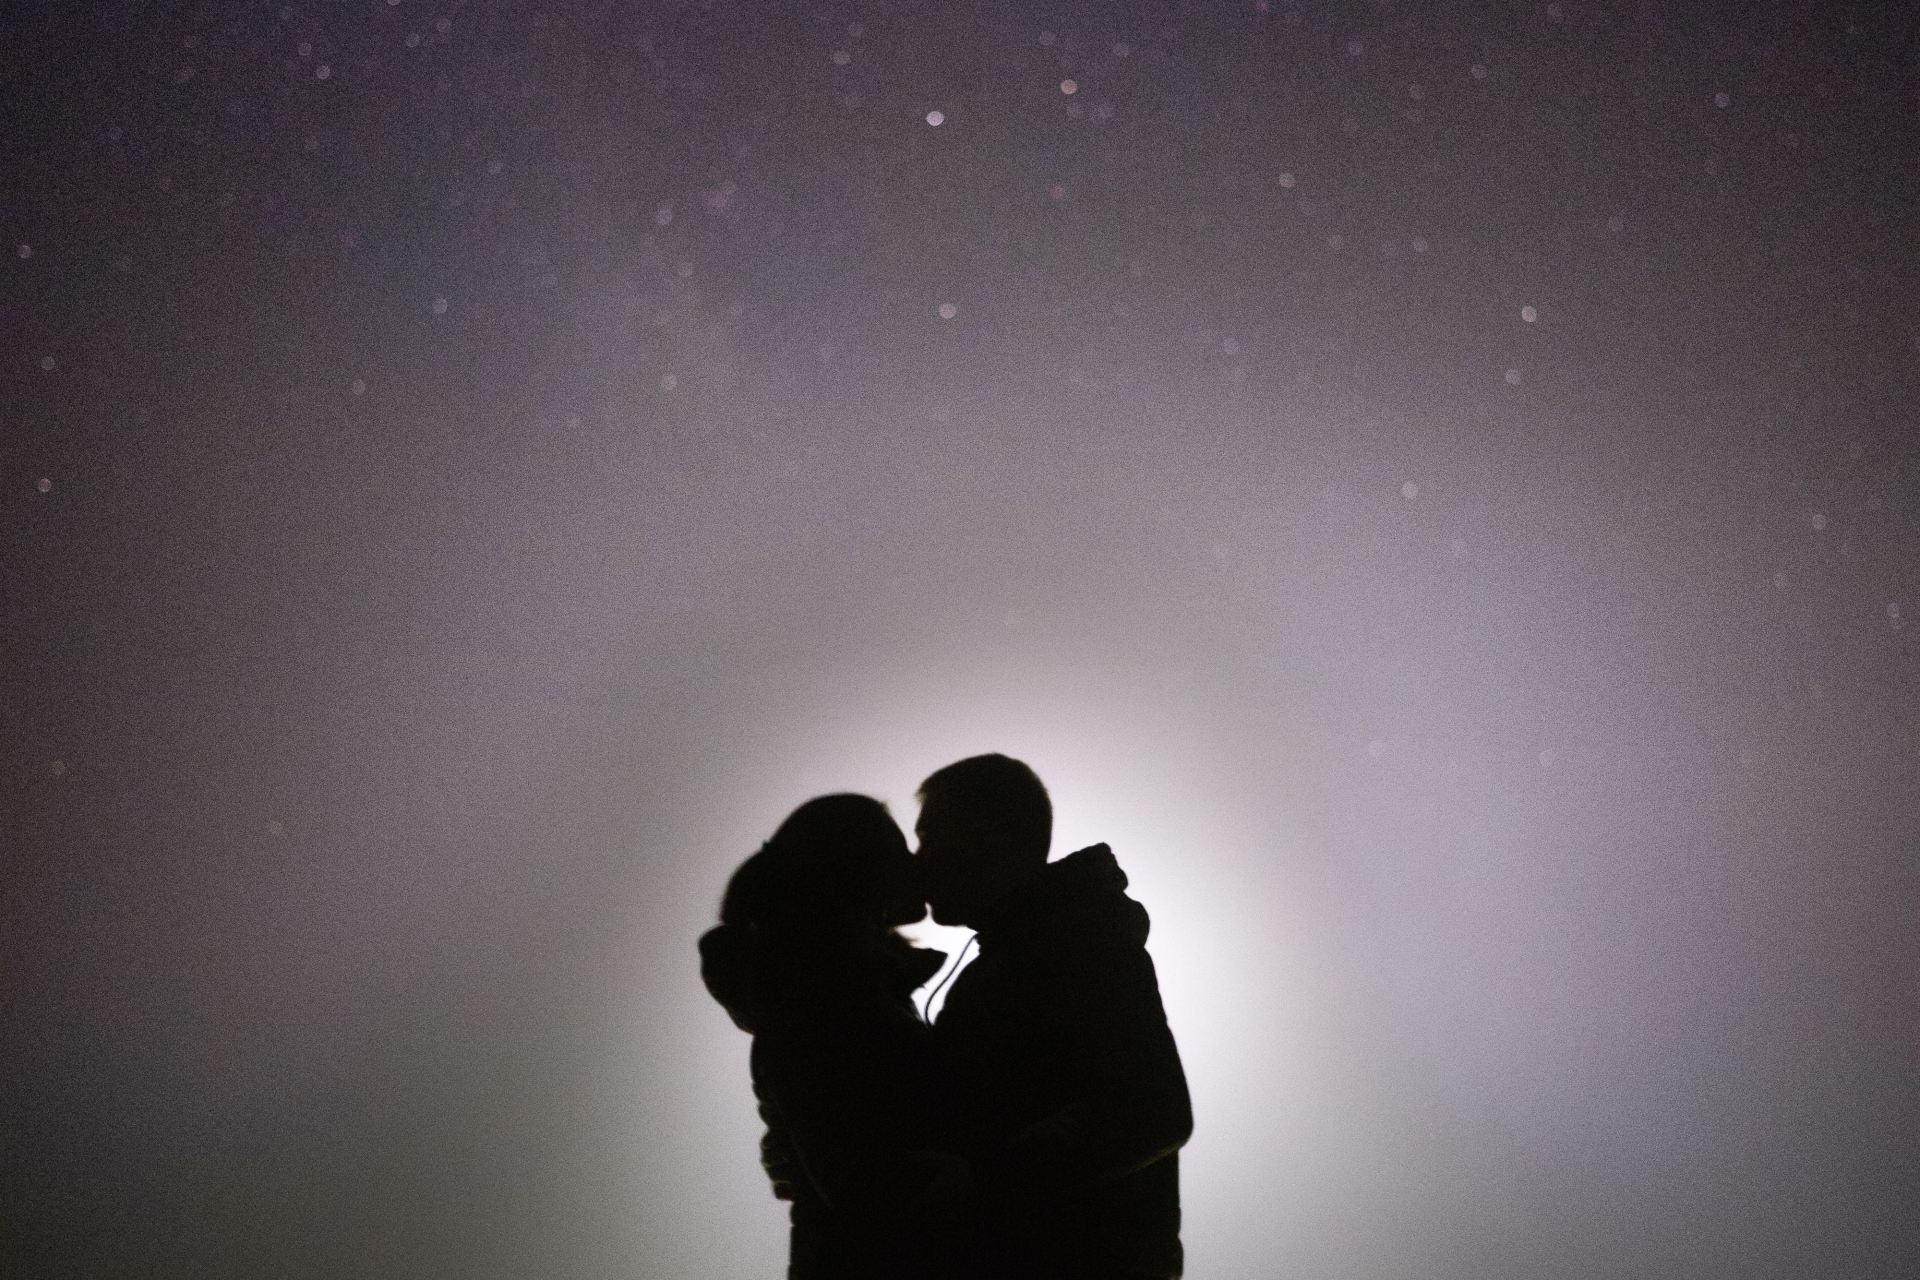 silhouette of man and woman kissing under starry night